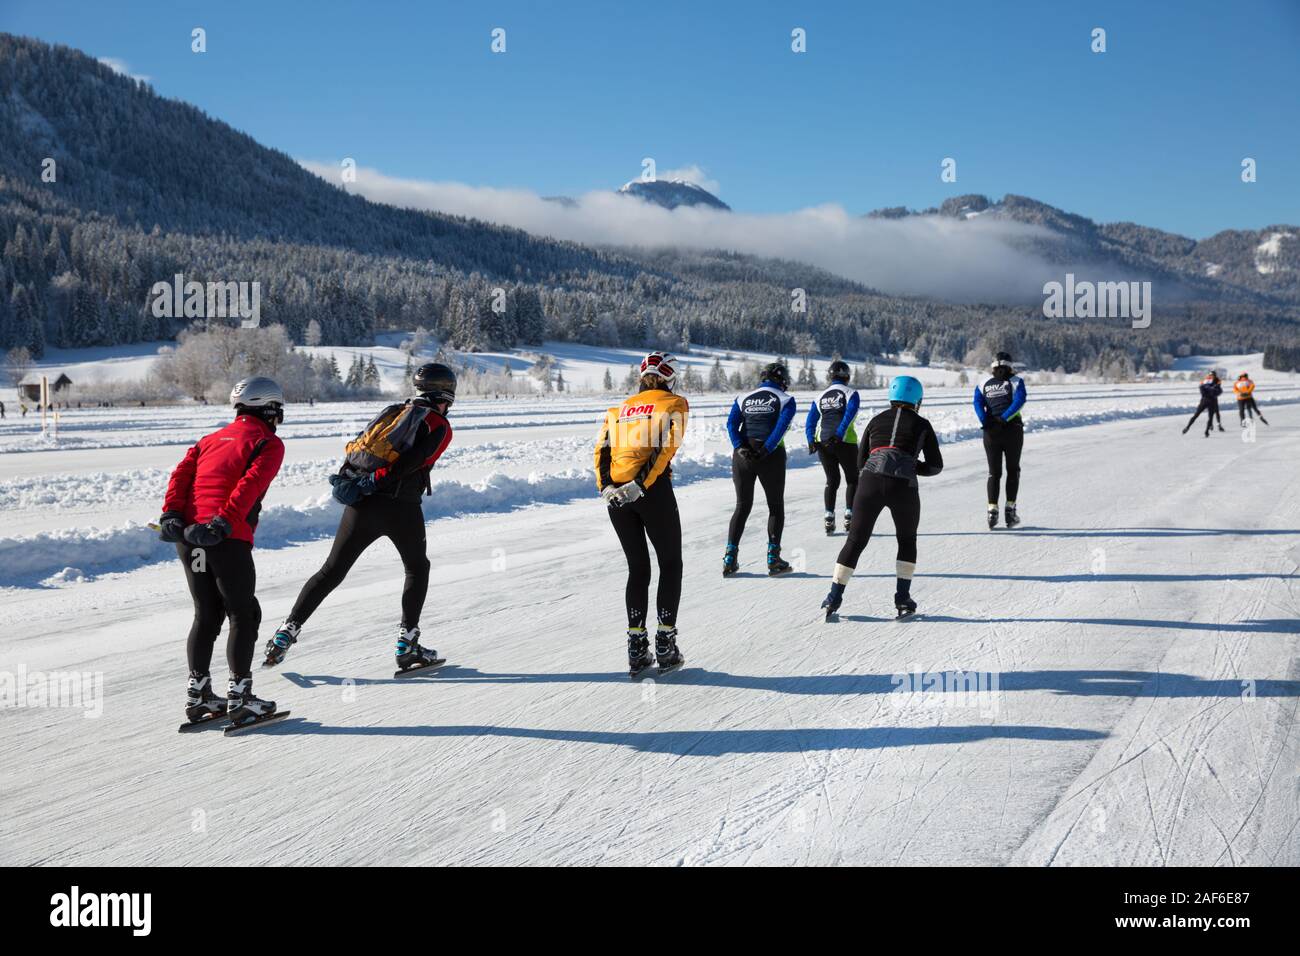 Ice skating on the lake in a beautiful winter landscape. Tourists enjoy the  ice skating on frozen Lake Weissensee, Carinthia, Alps, Austria Stock Photo  - Alamy